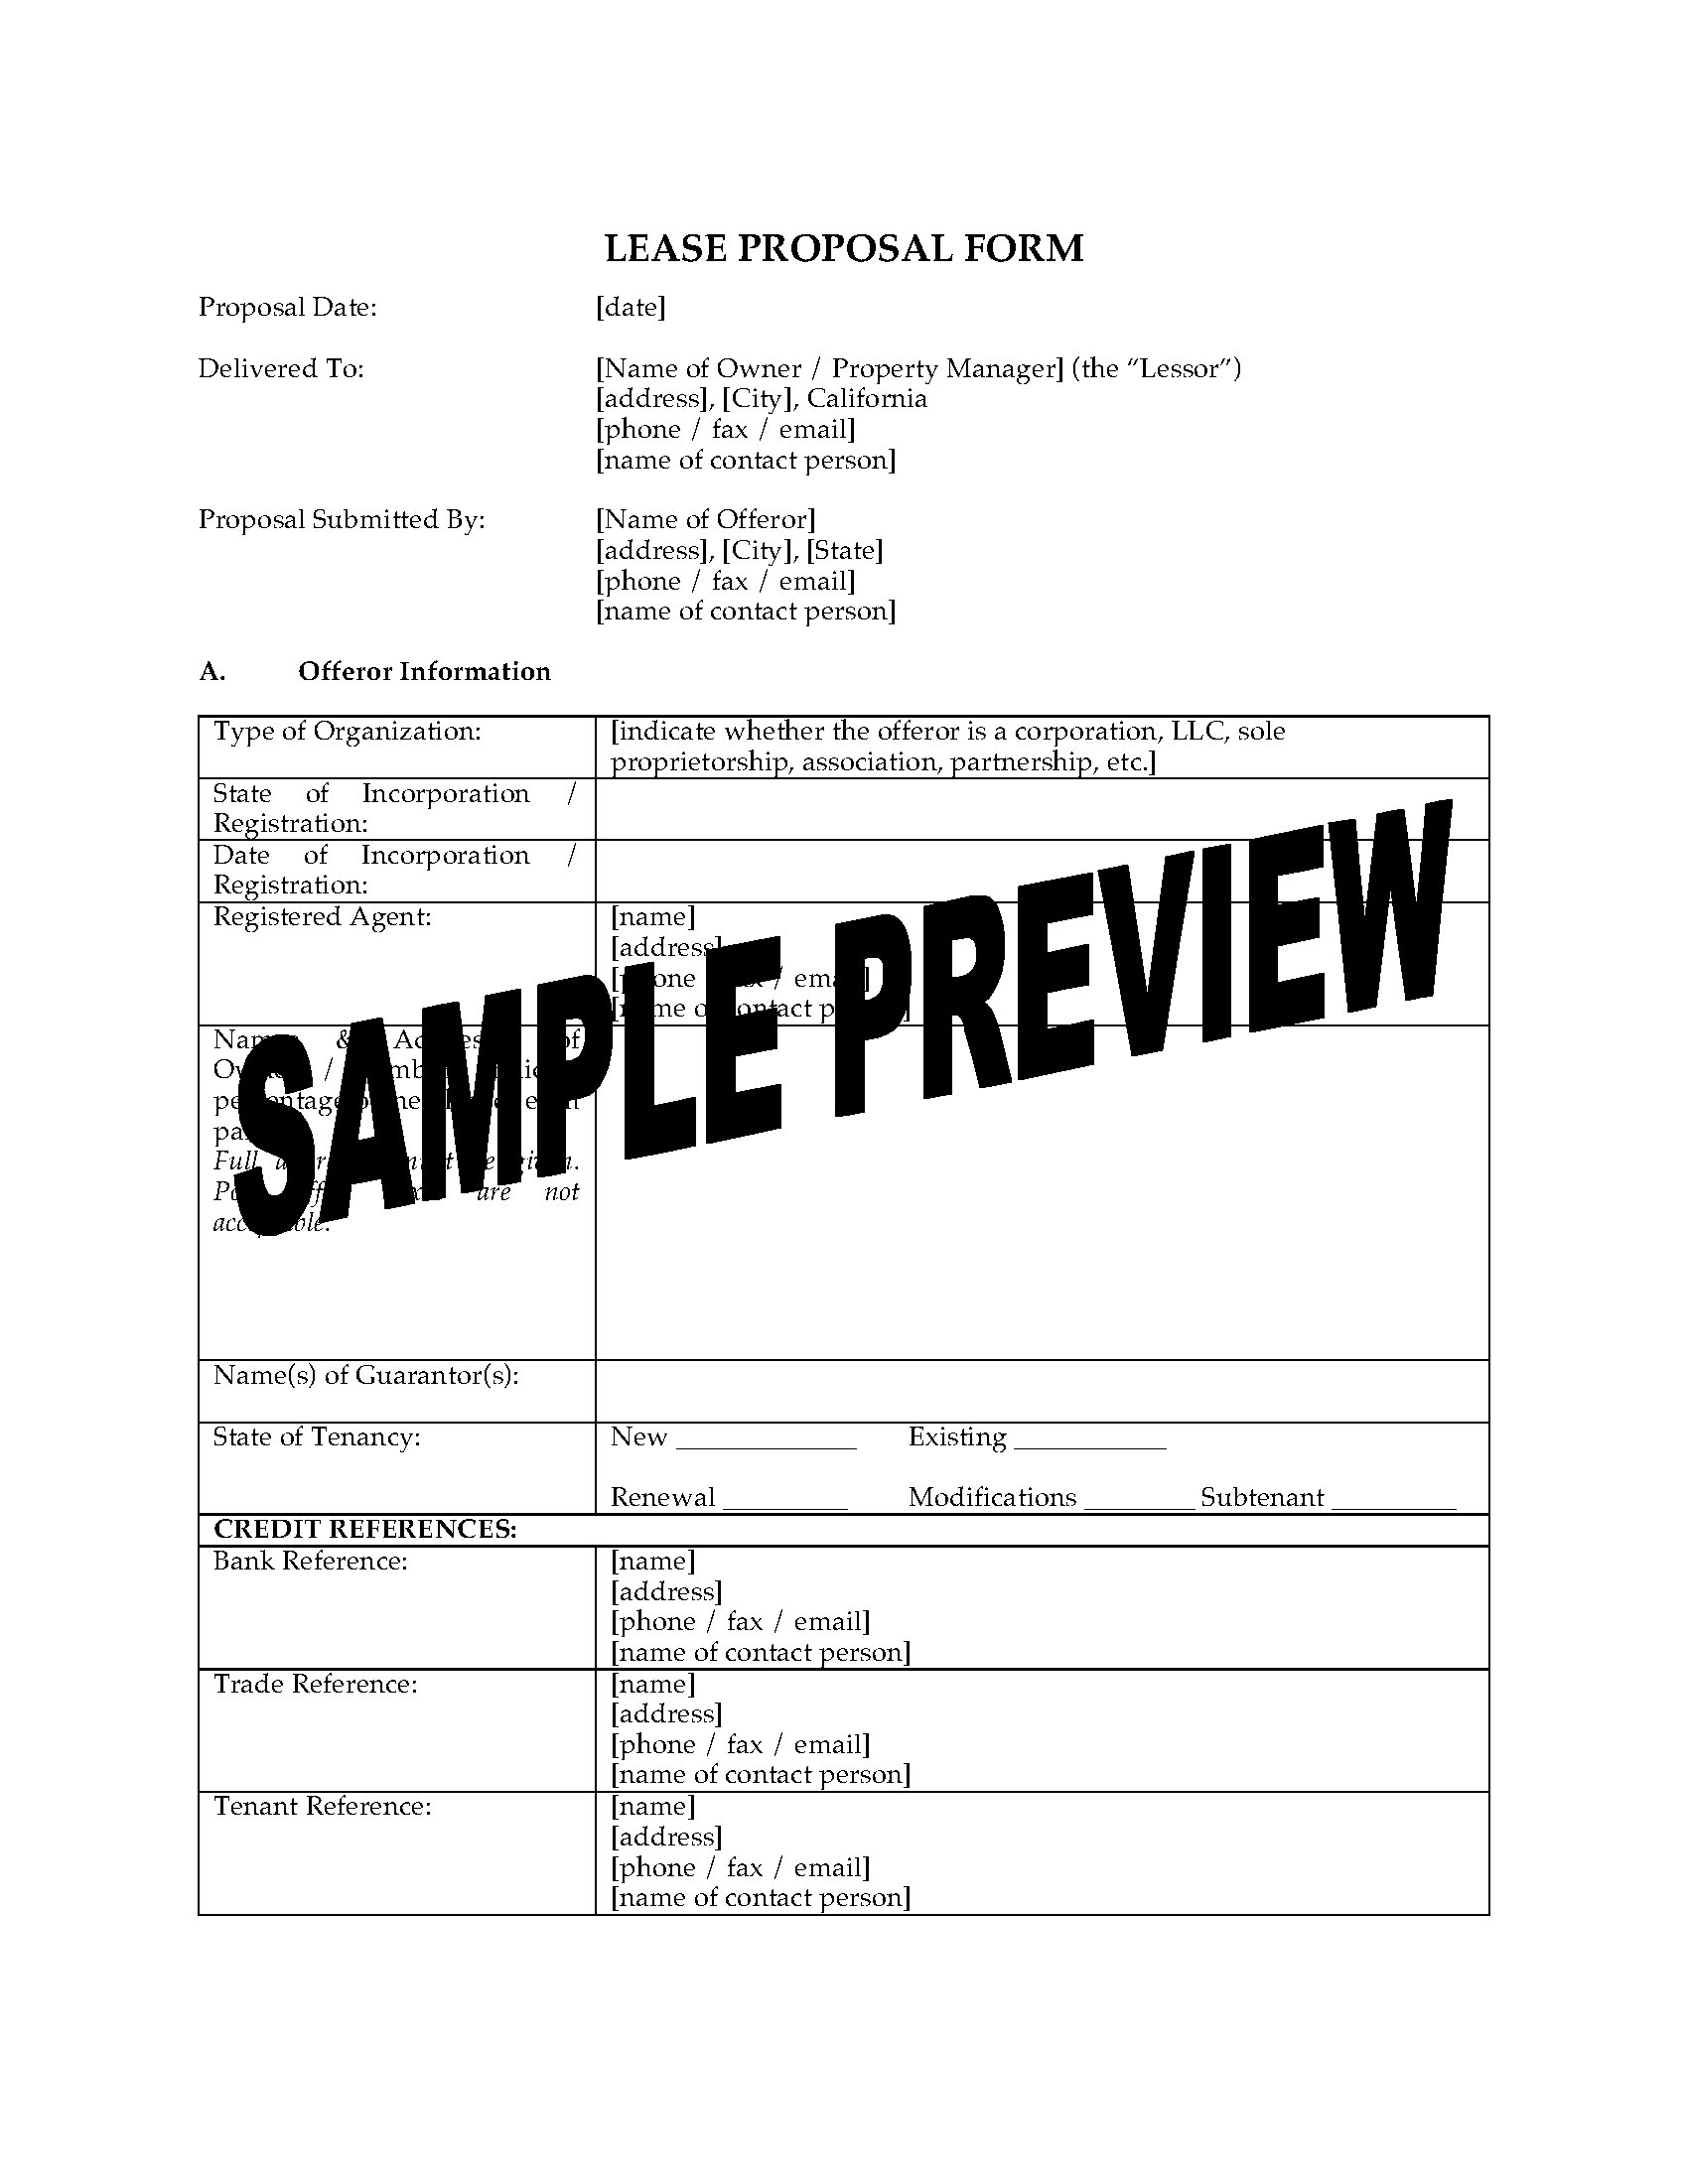 USA Lease Proposal for Commercial Premises  Legal Forms and In Business Lease Proposal Template